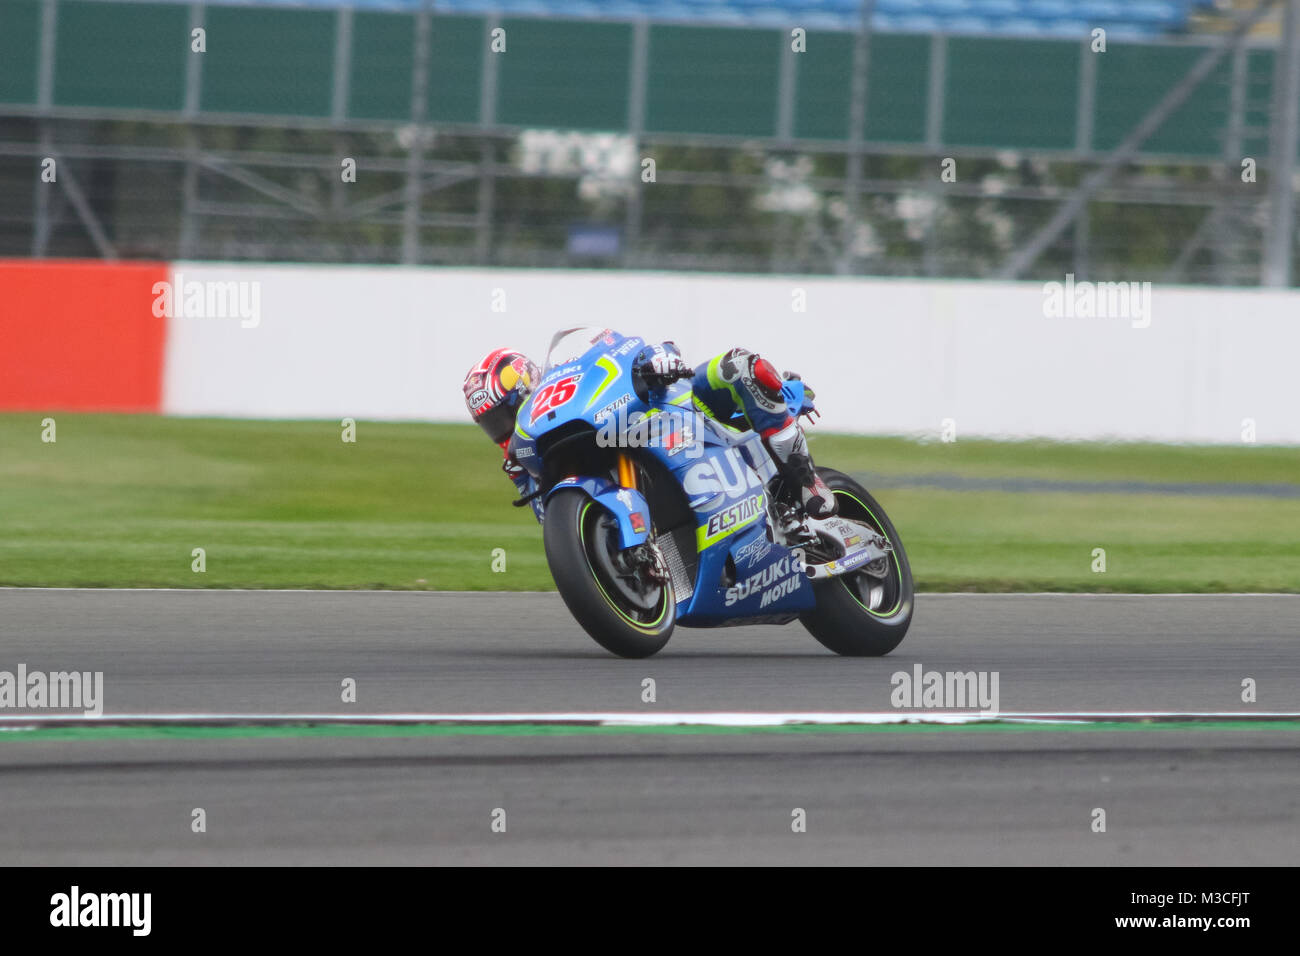 Maverick Vinales exiting Beckets corner and winding up for the Hanger straight during Friday Free Practice at the MotoGP British Grand Prix 2016 Stock Photo